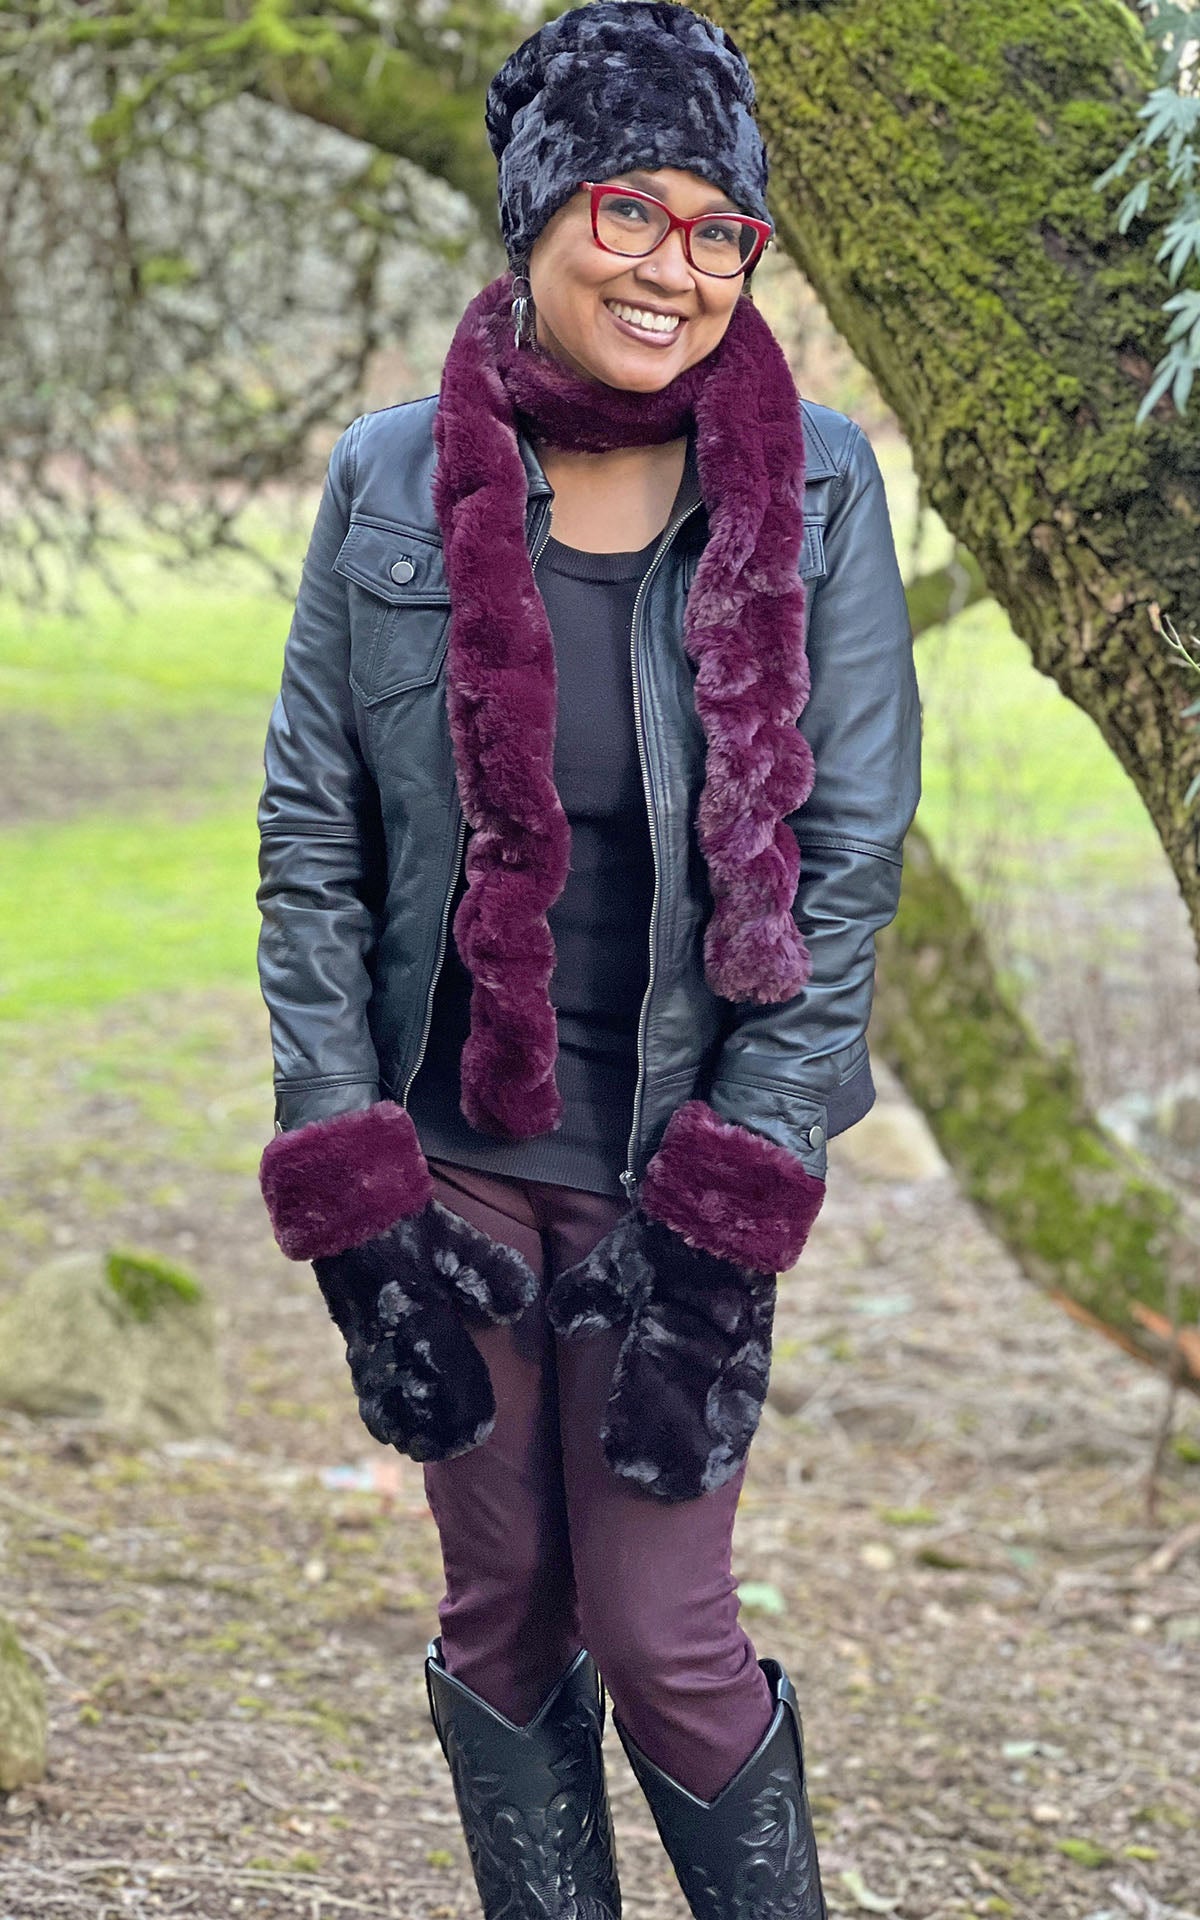 Woman wearing the Royal Opulence Skinny Scarf in Merlot, with matching Merlot Mittens with Cuddly Black. Her Hat is a Cuffed Pillbox in Cuddly Black. Handmade by Pandemonium Seattle.